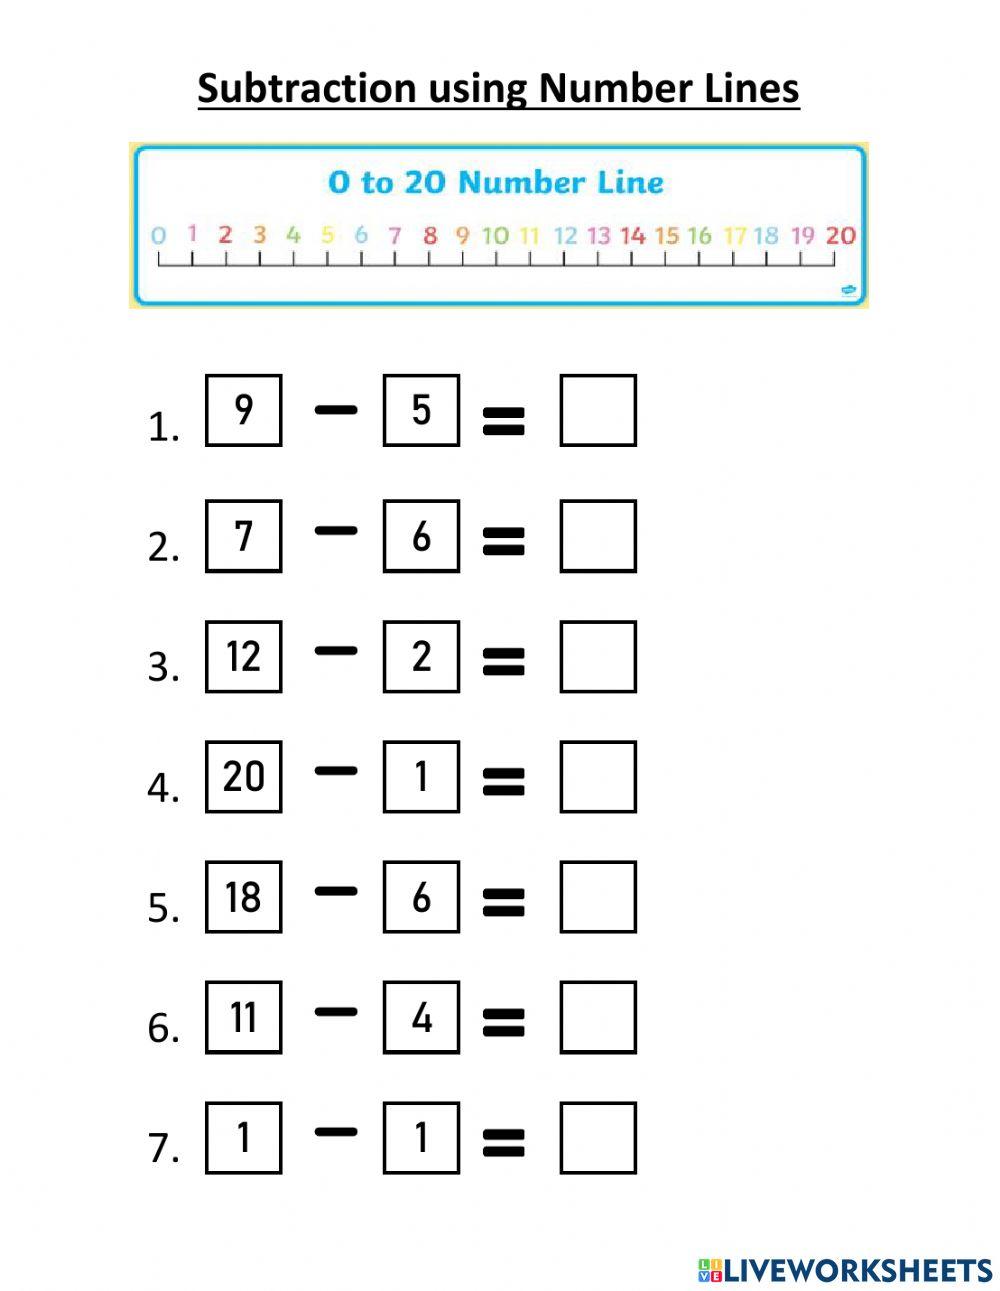 Add&Sub Number Lines